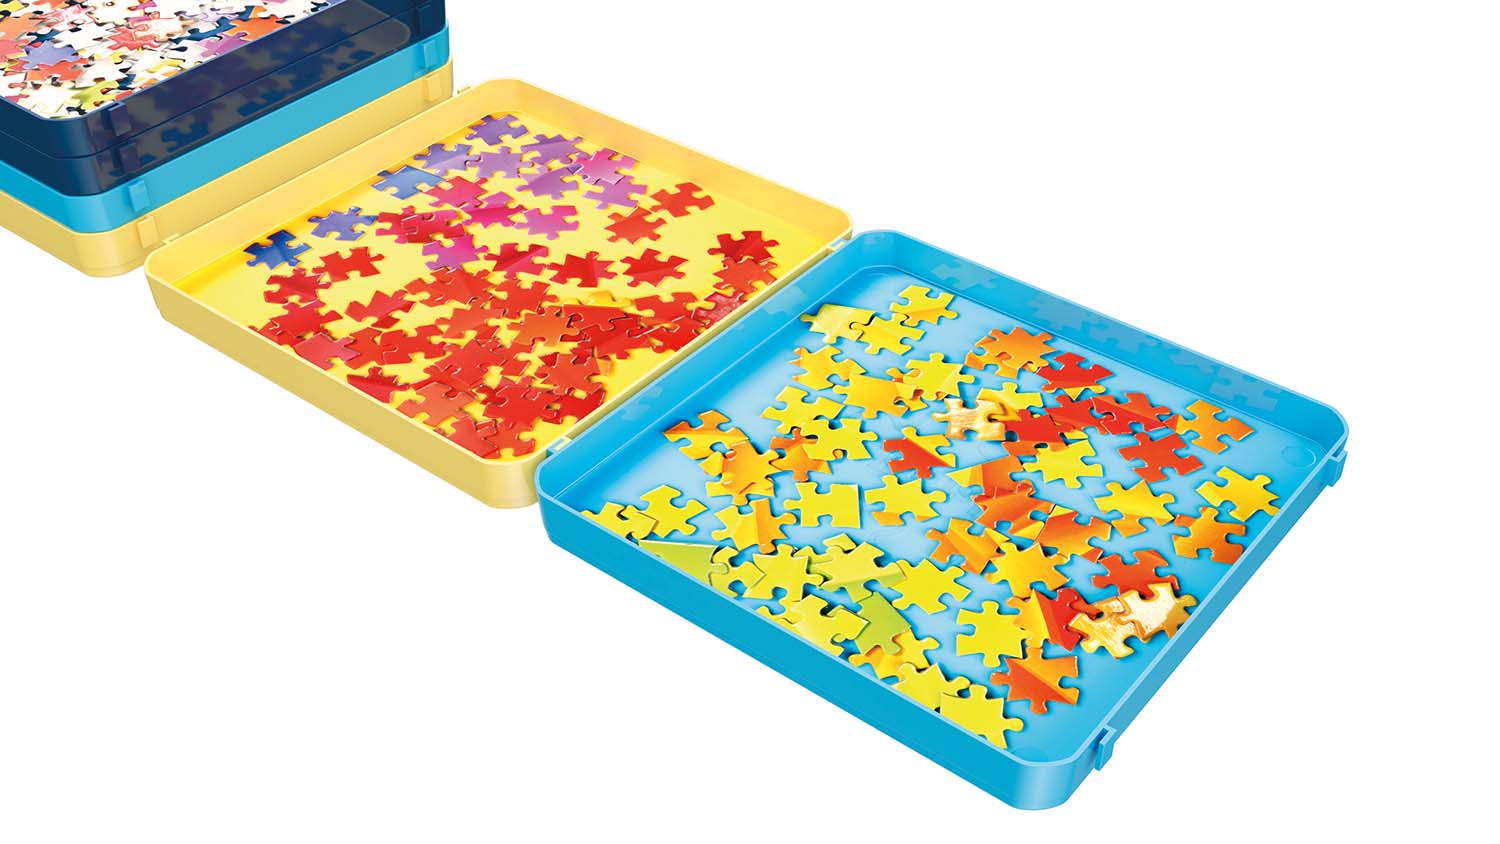 BEST Puzzle Sorting Trays - Scratch and Dent